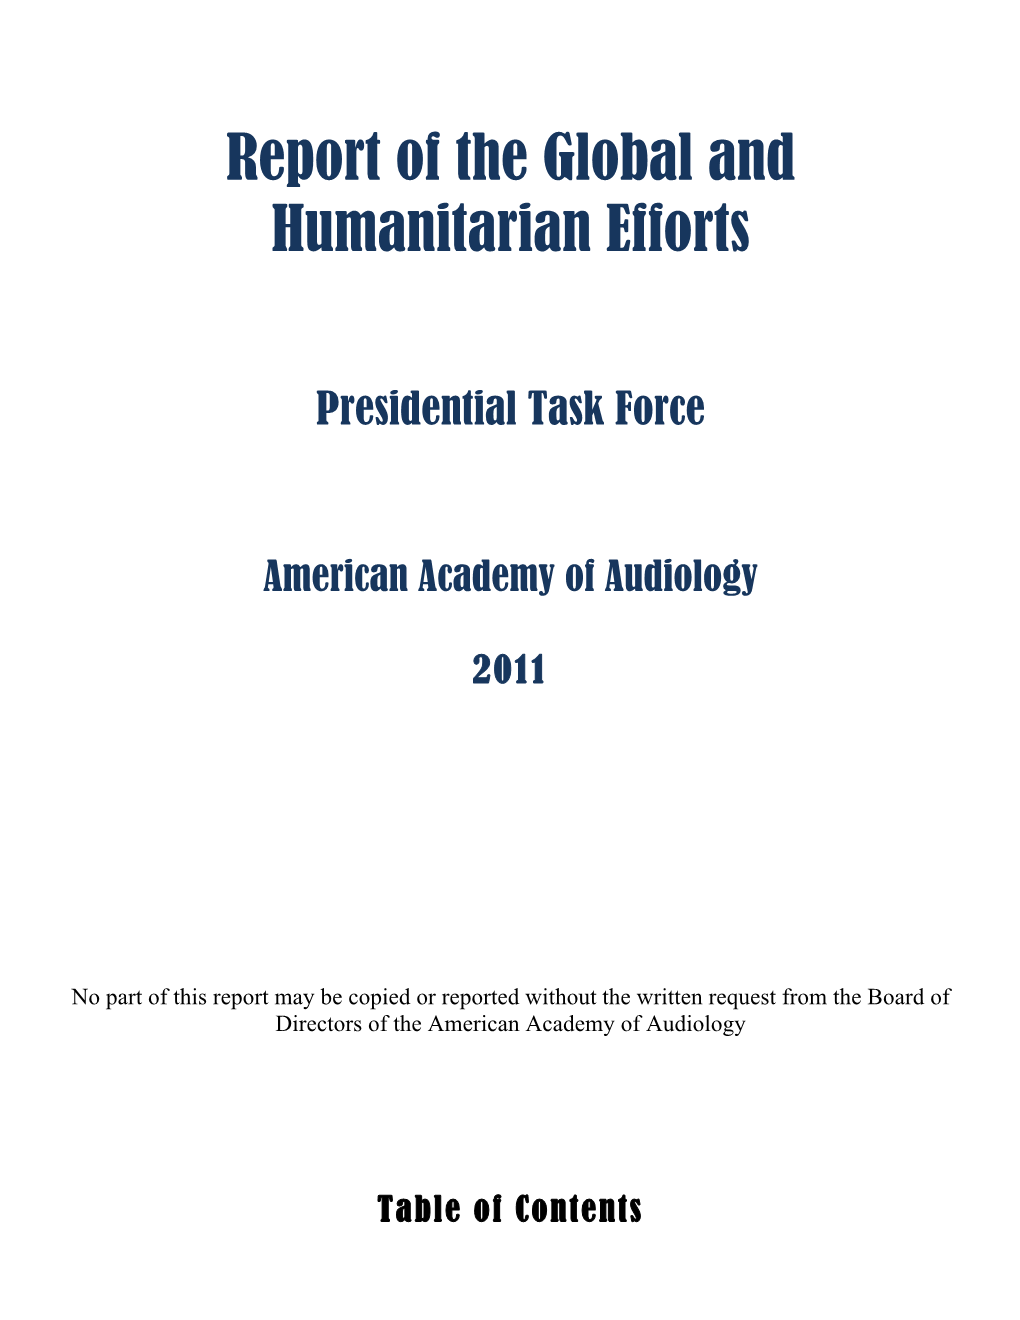 Report of the Global and Humanitarian Efforts